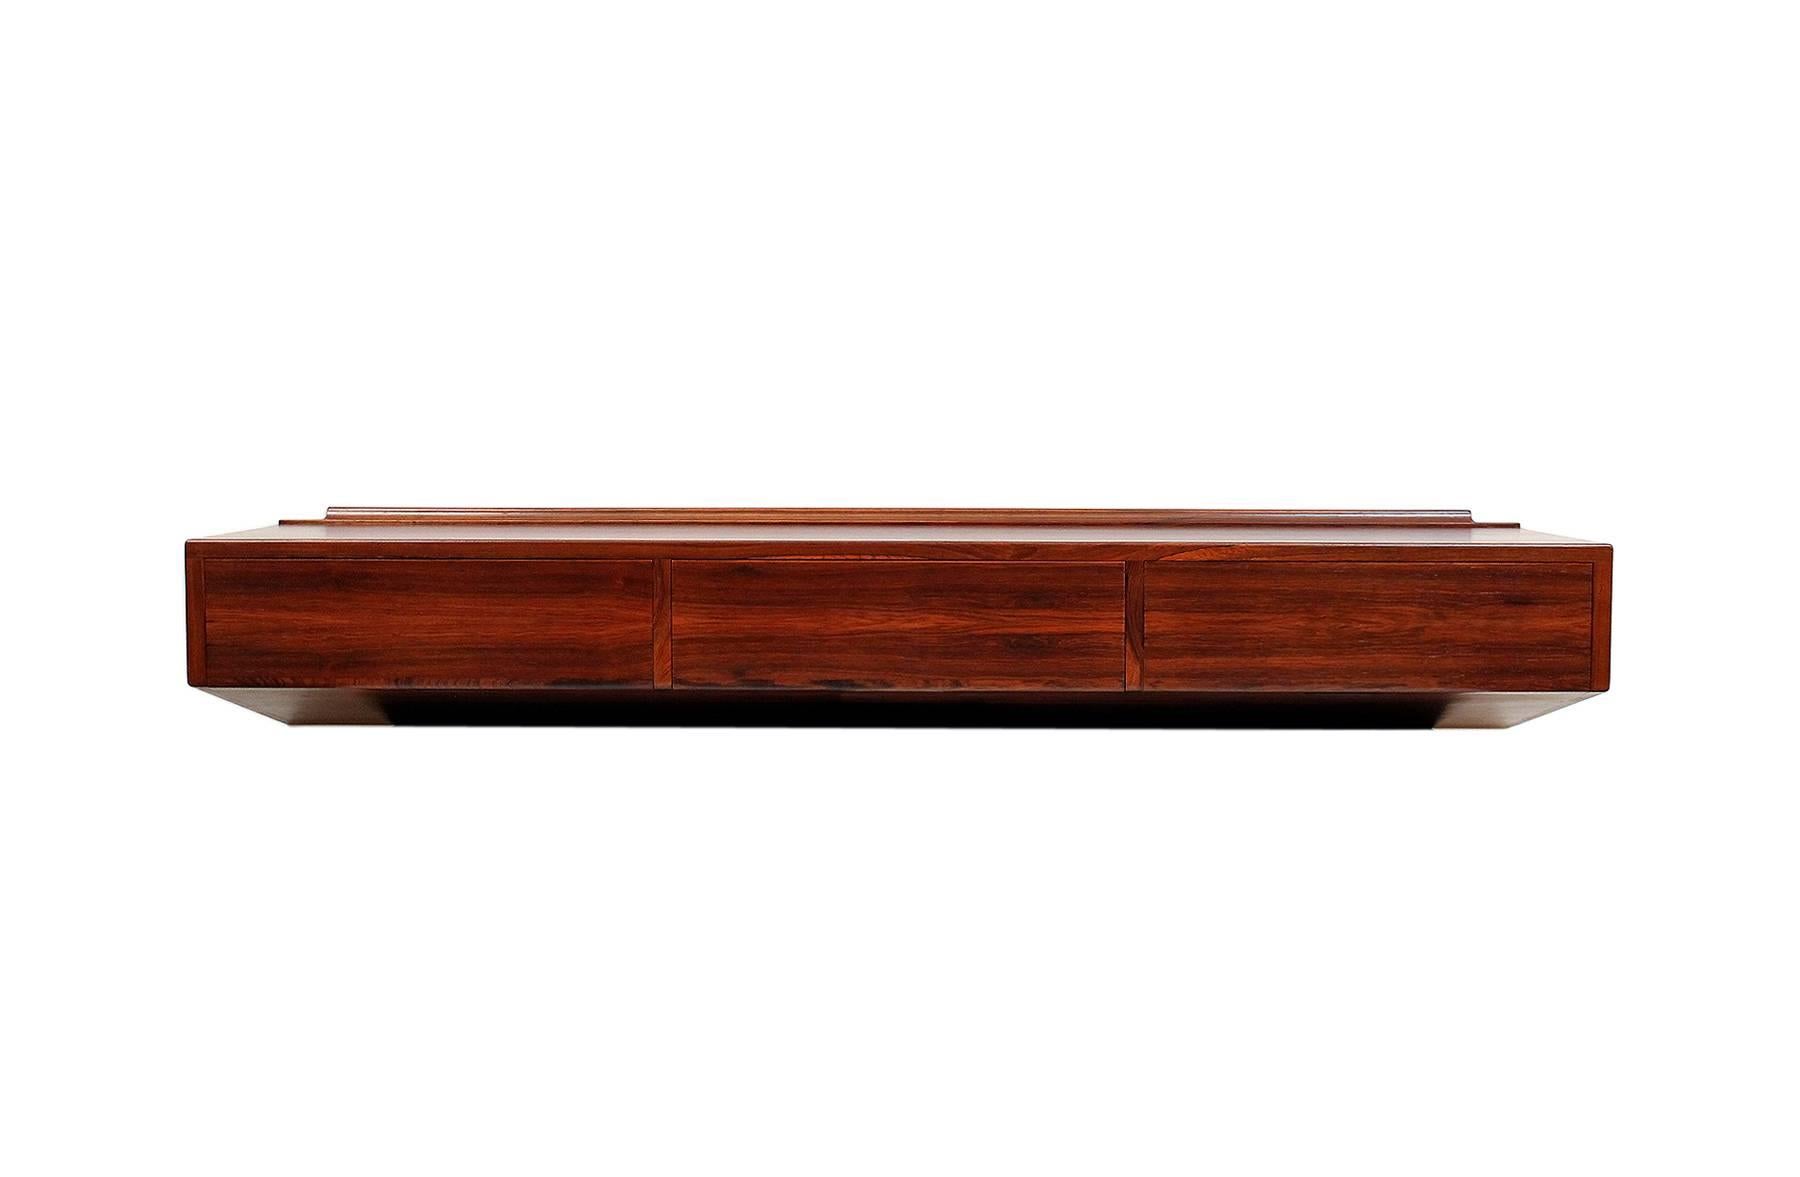 Architectural wall-mounted console or desk by Danish designer Arne Hovmand Olsen. This piece features figured rosewood veneers and three drawers, one with partitions. Simple and functional design.